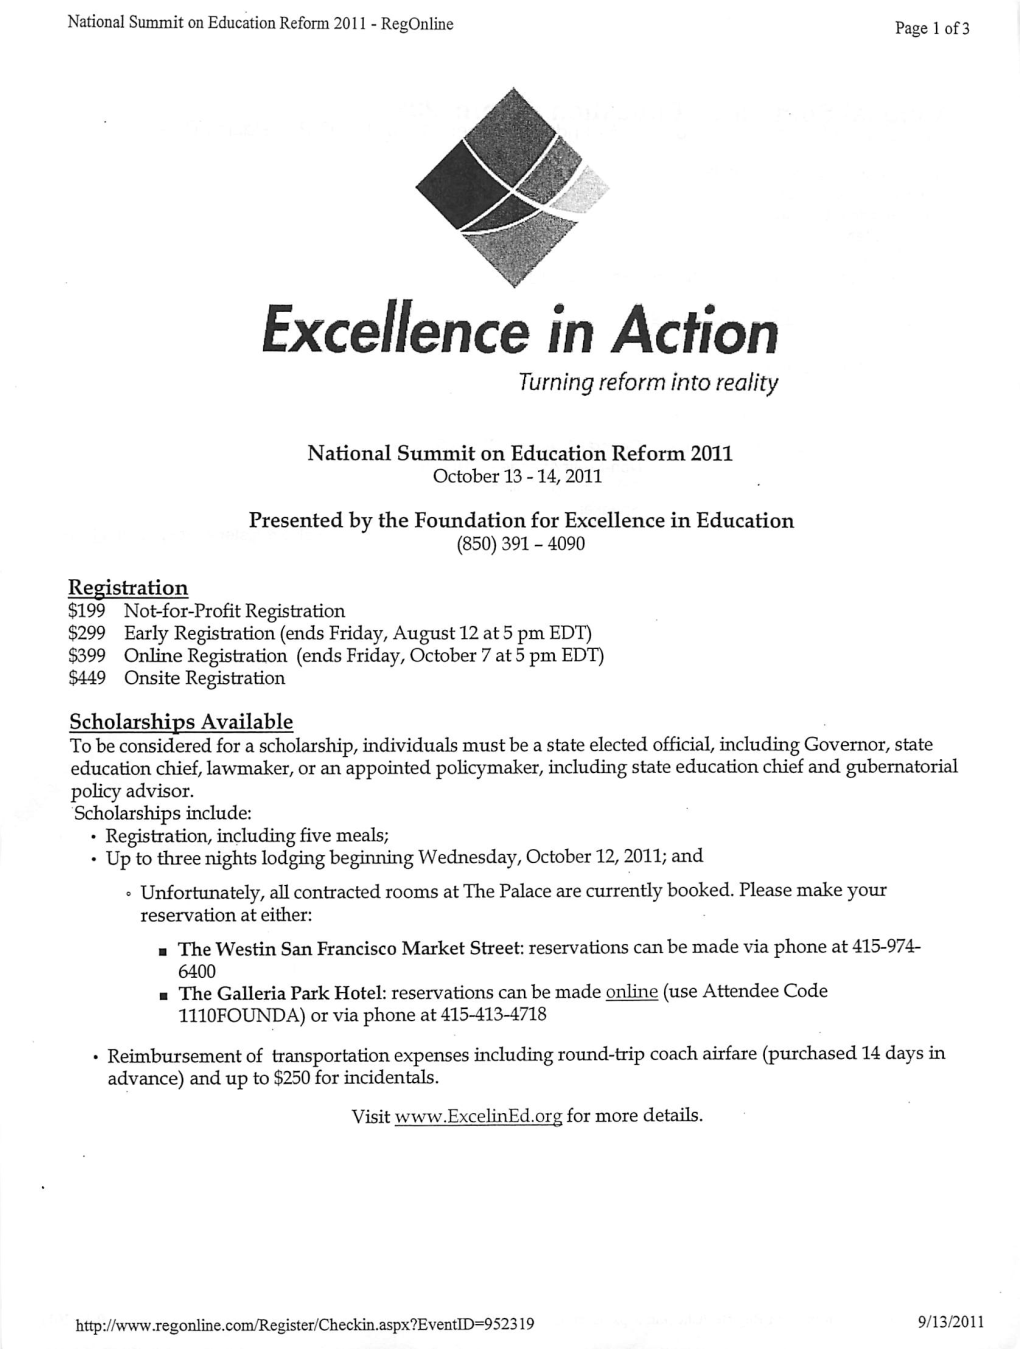 Excellence in Action Turning Reform Into Reality